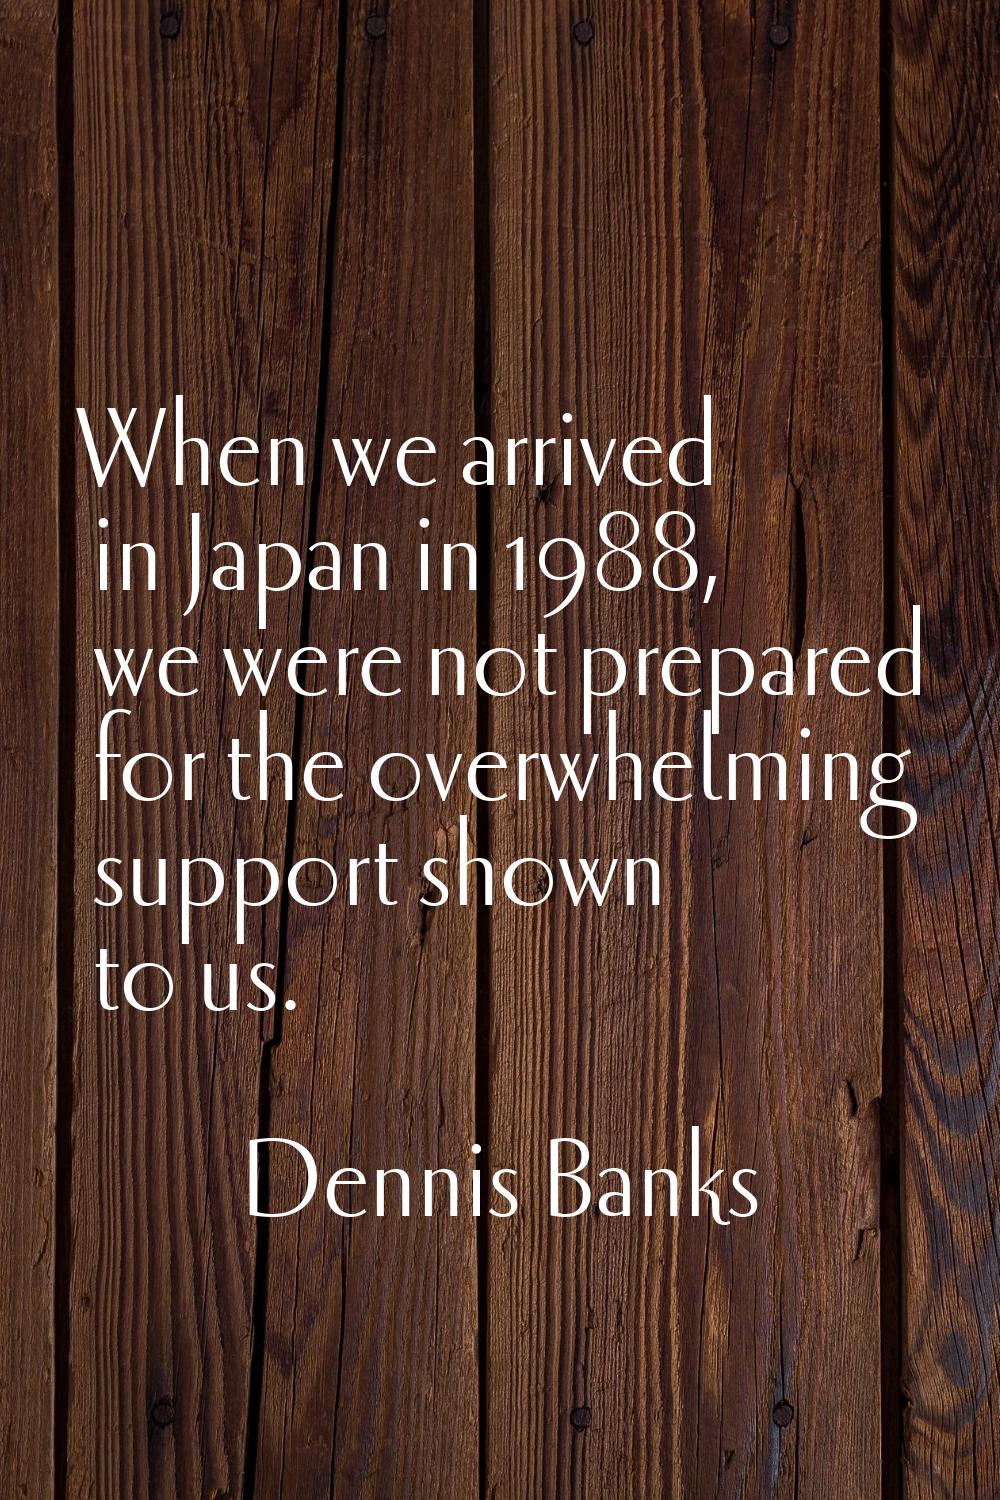 When we arrived in Japan in 1988, we were not prepared for the overwhelming support shown to us.